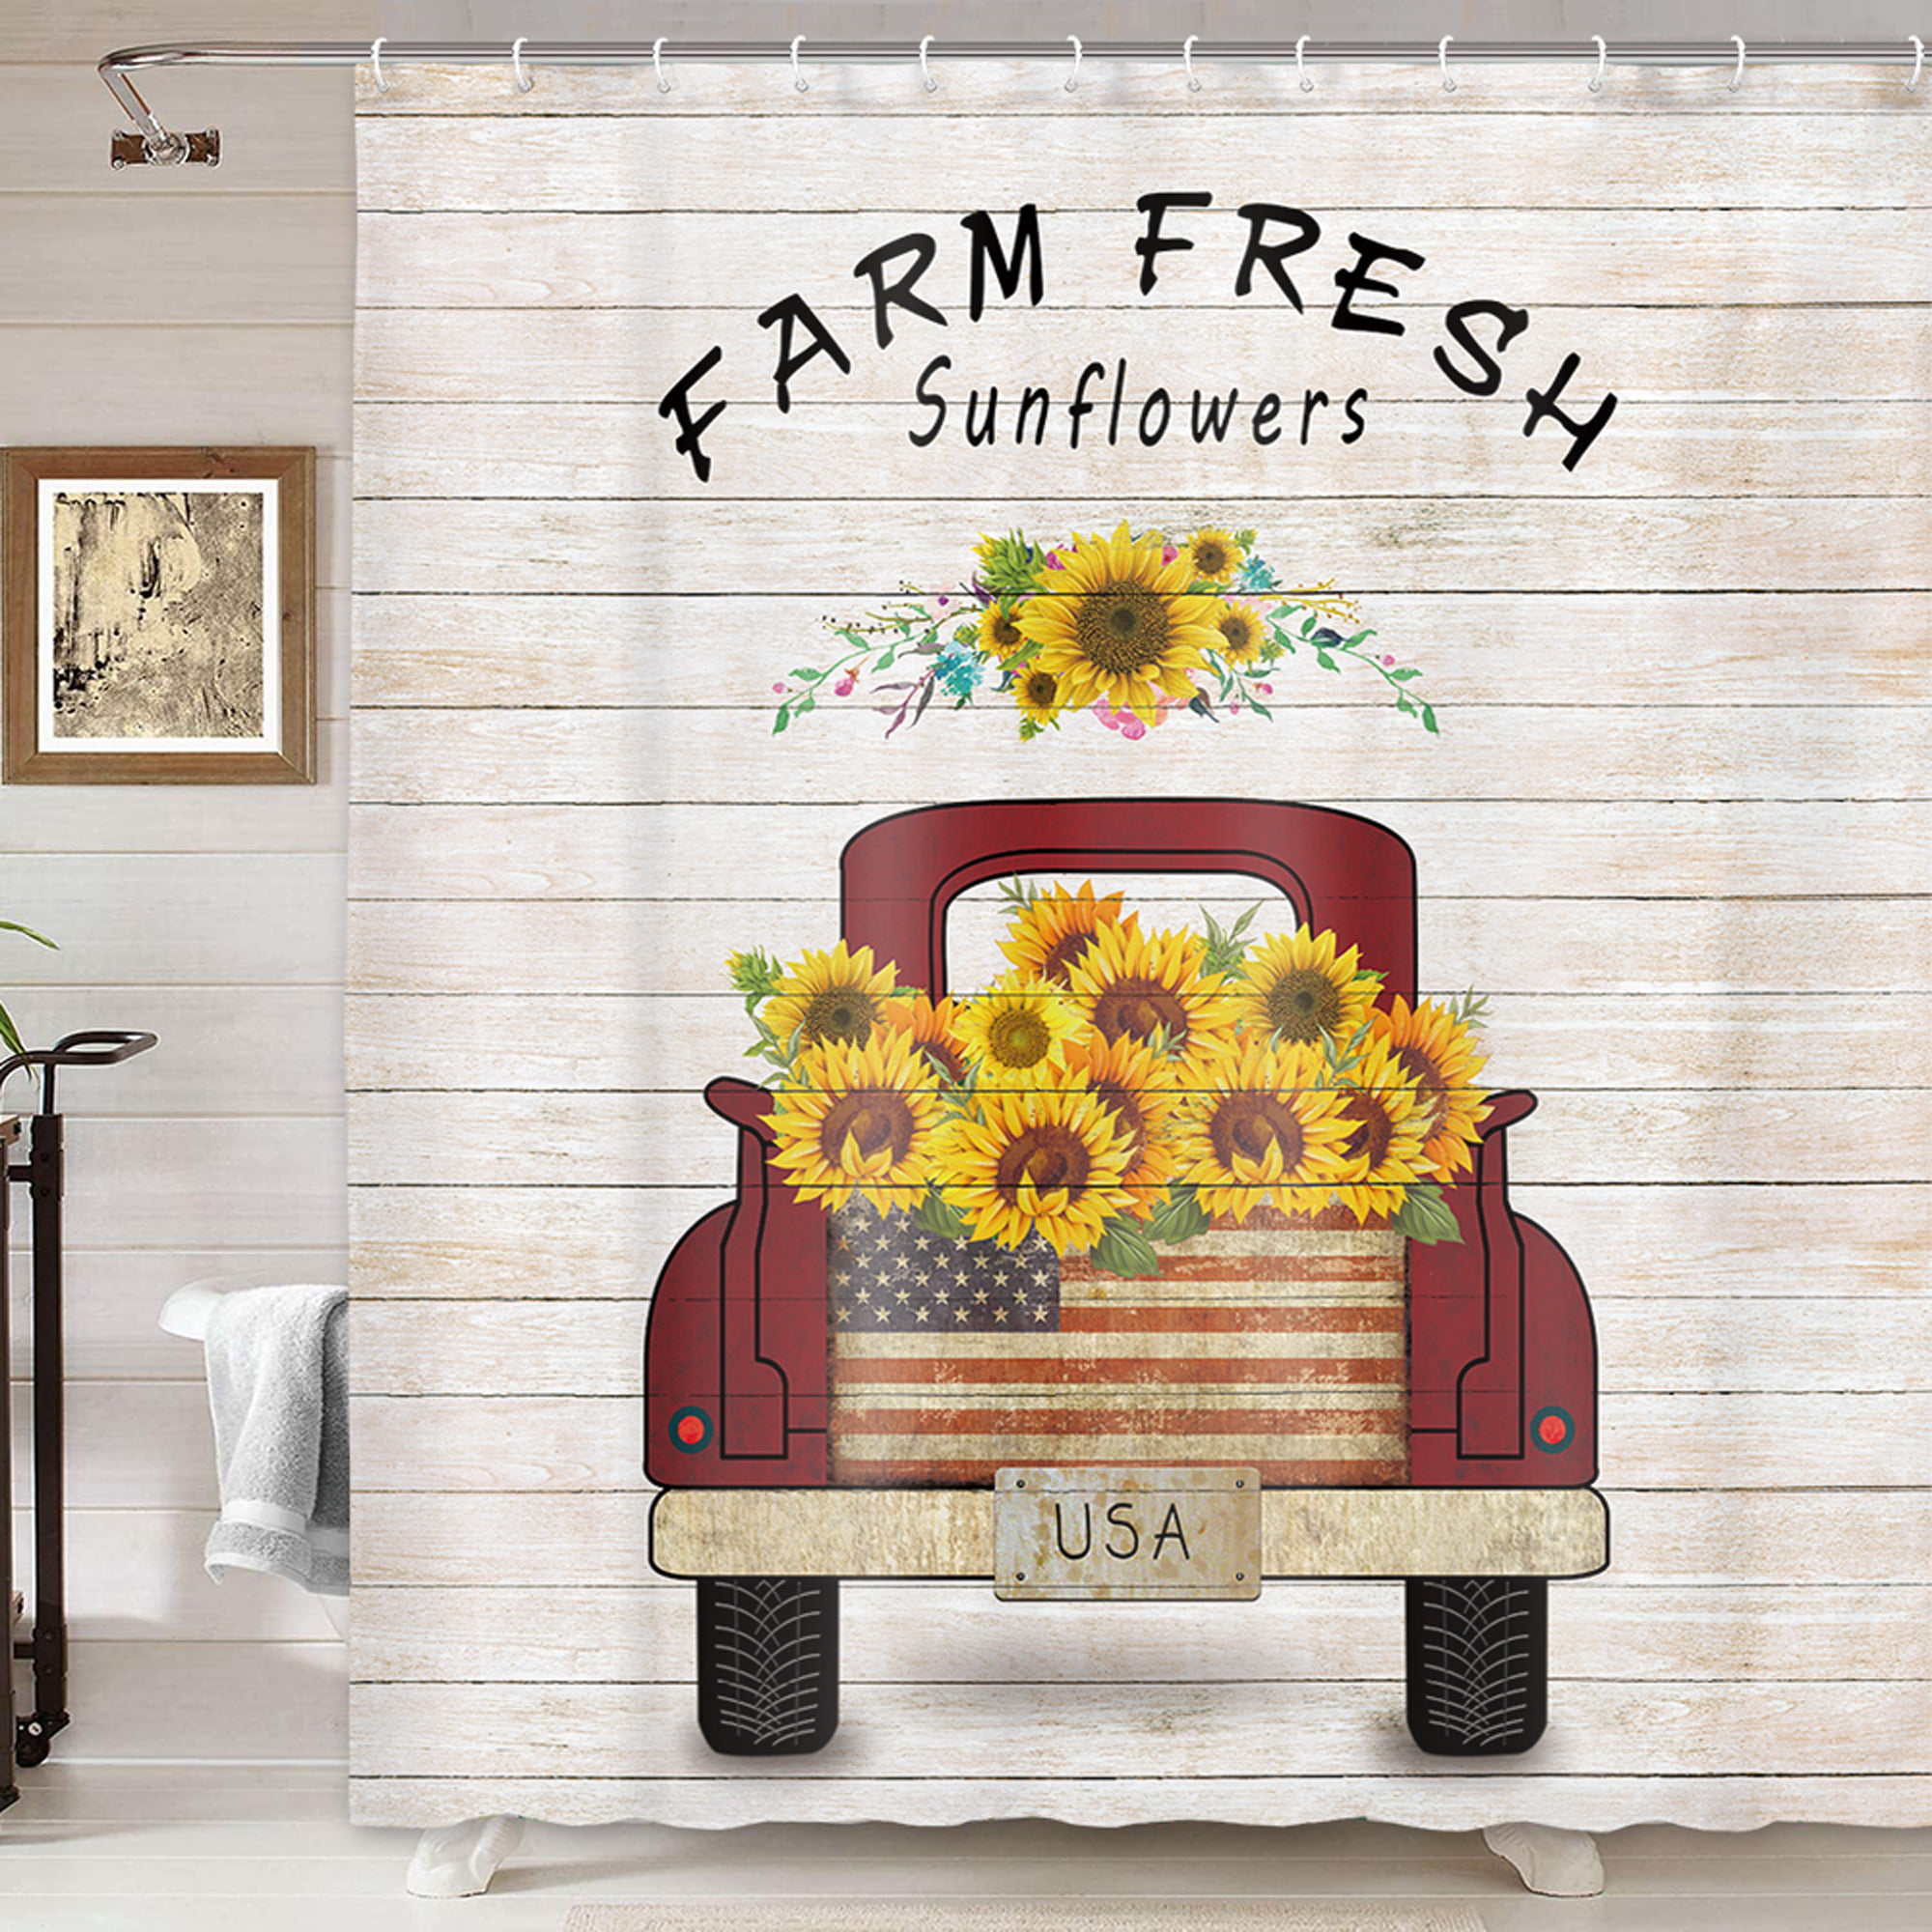 Details about   Funny Farm Cow Spring Sunflowers Daisy Shower Curtain Sets For Bathroom Decor 